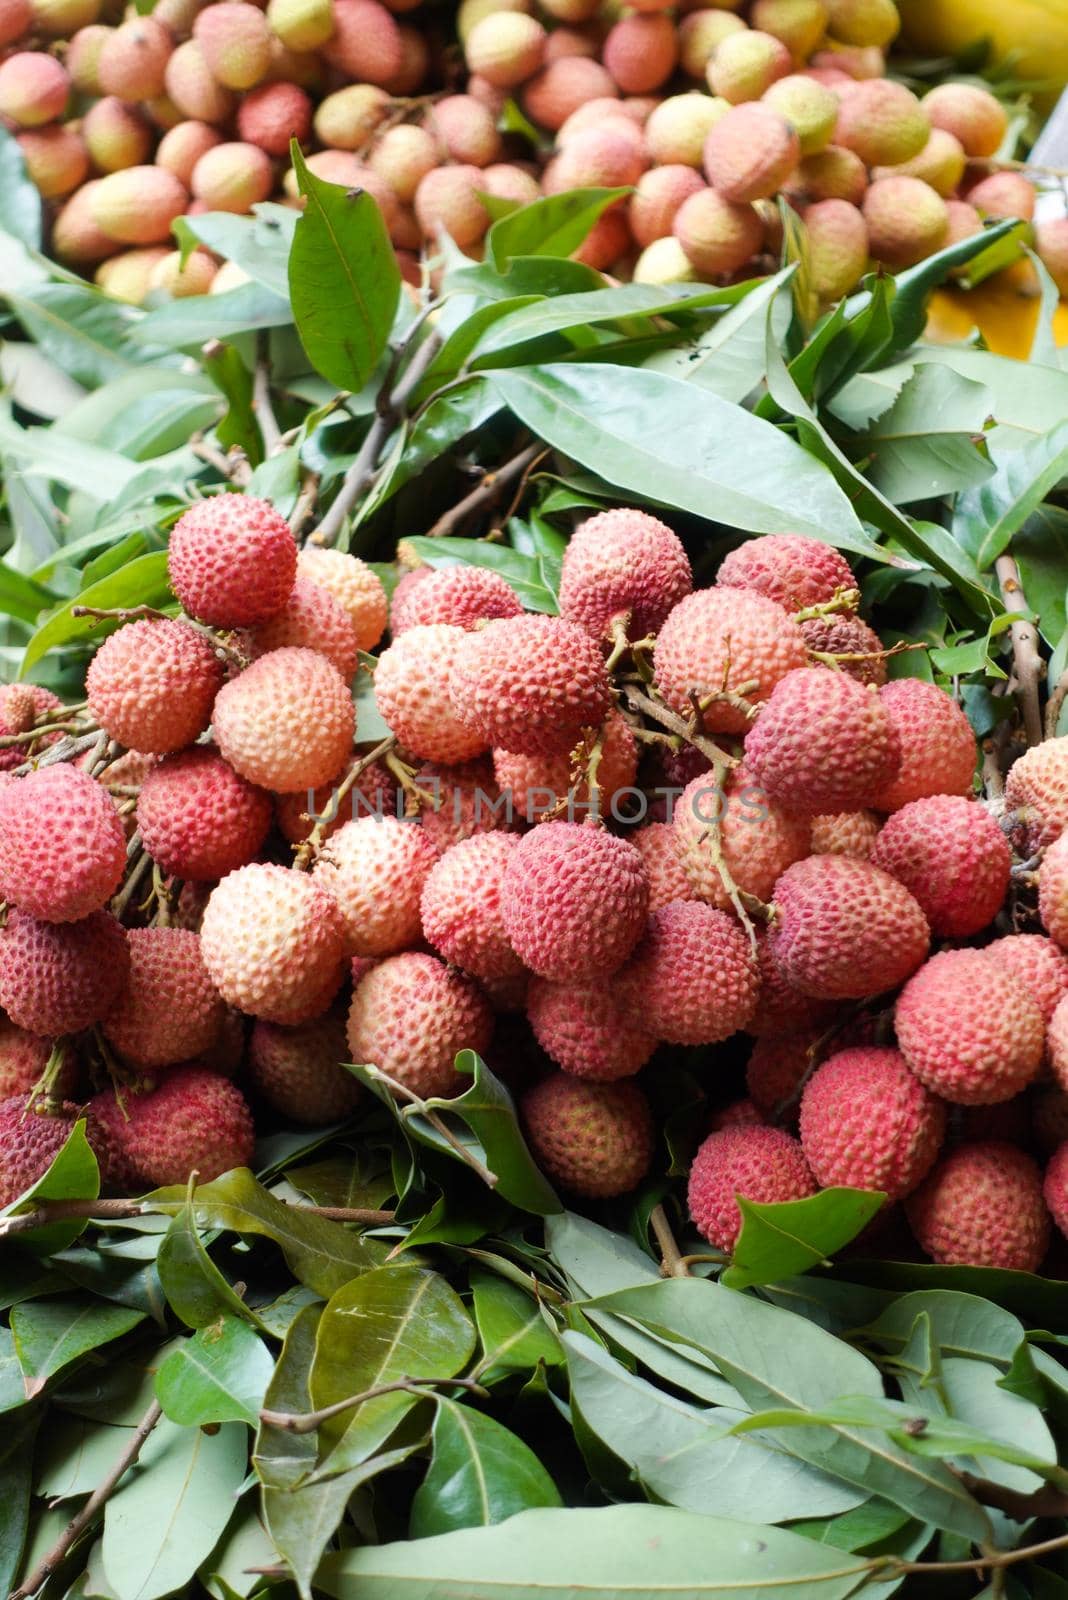 fresh Lychee display for sale at local market .